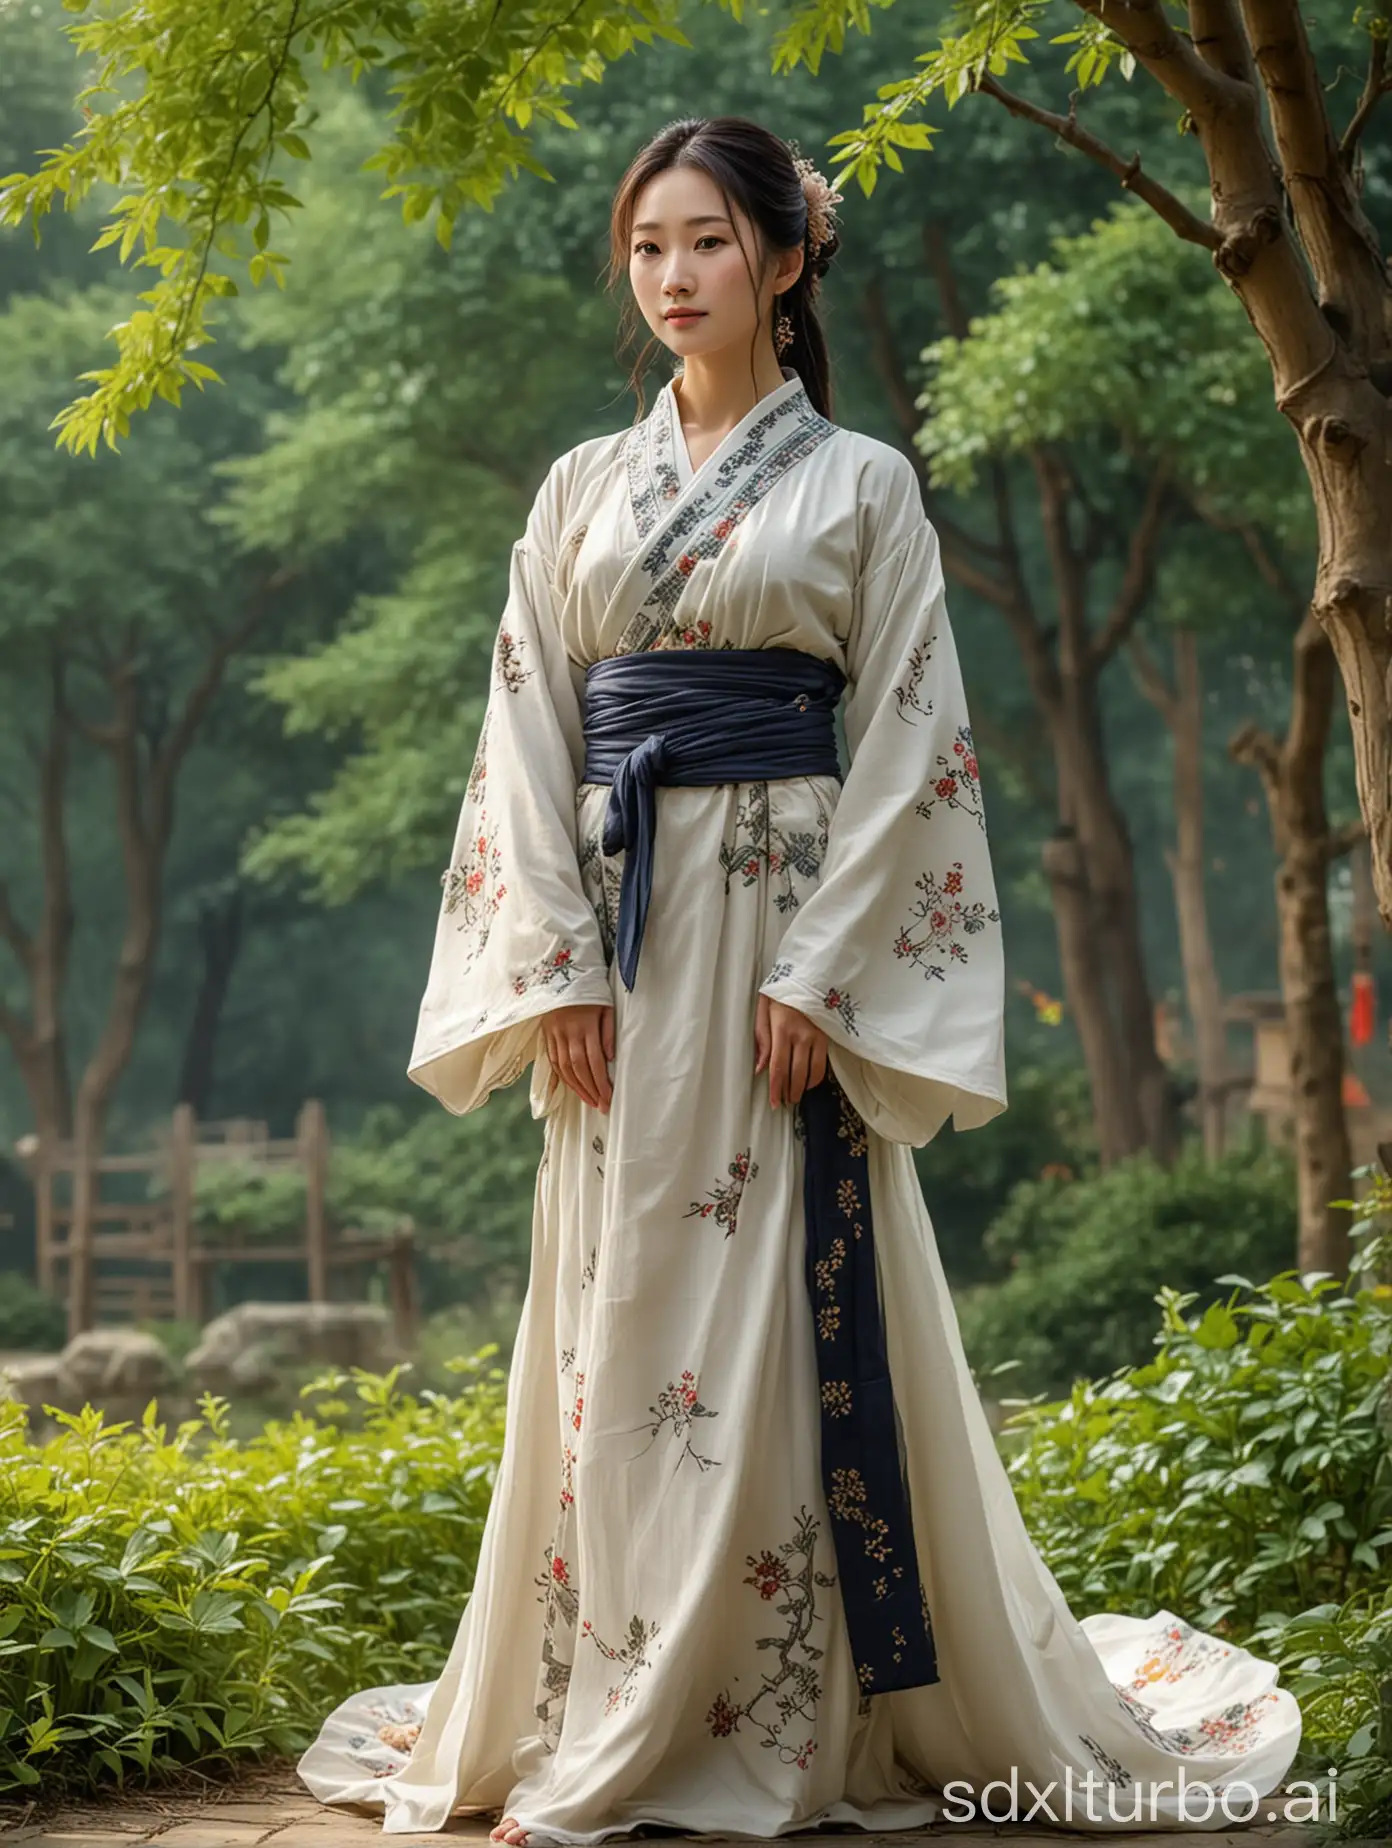 Eastern Han-style clothing, full-bodied figure, full body photograph, artistic photography, exquisite details, high-definition pixels, classical garden background.